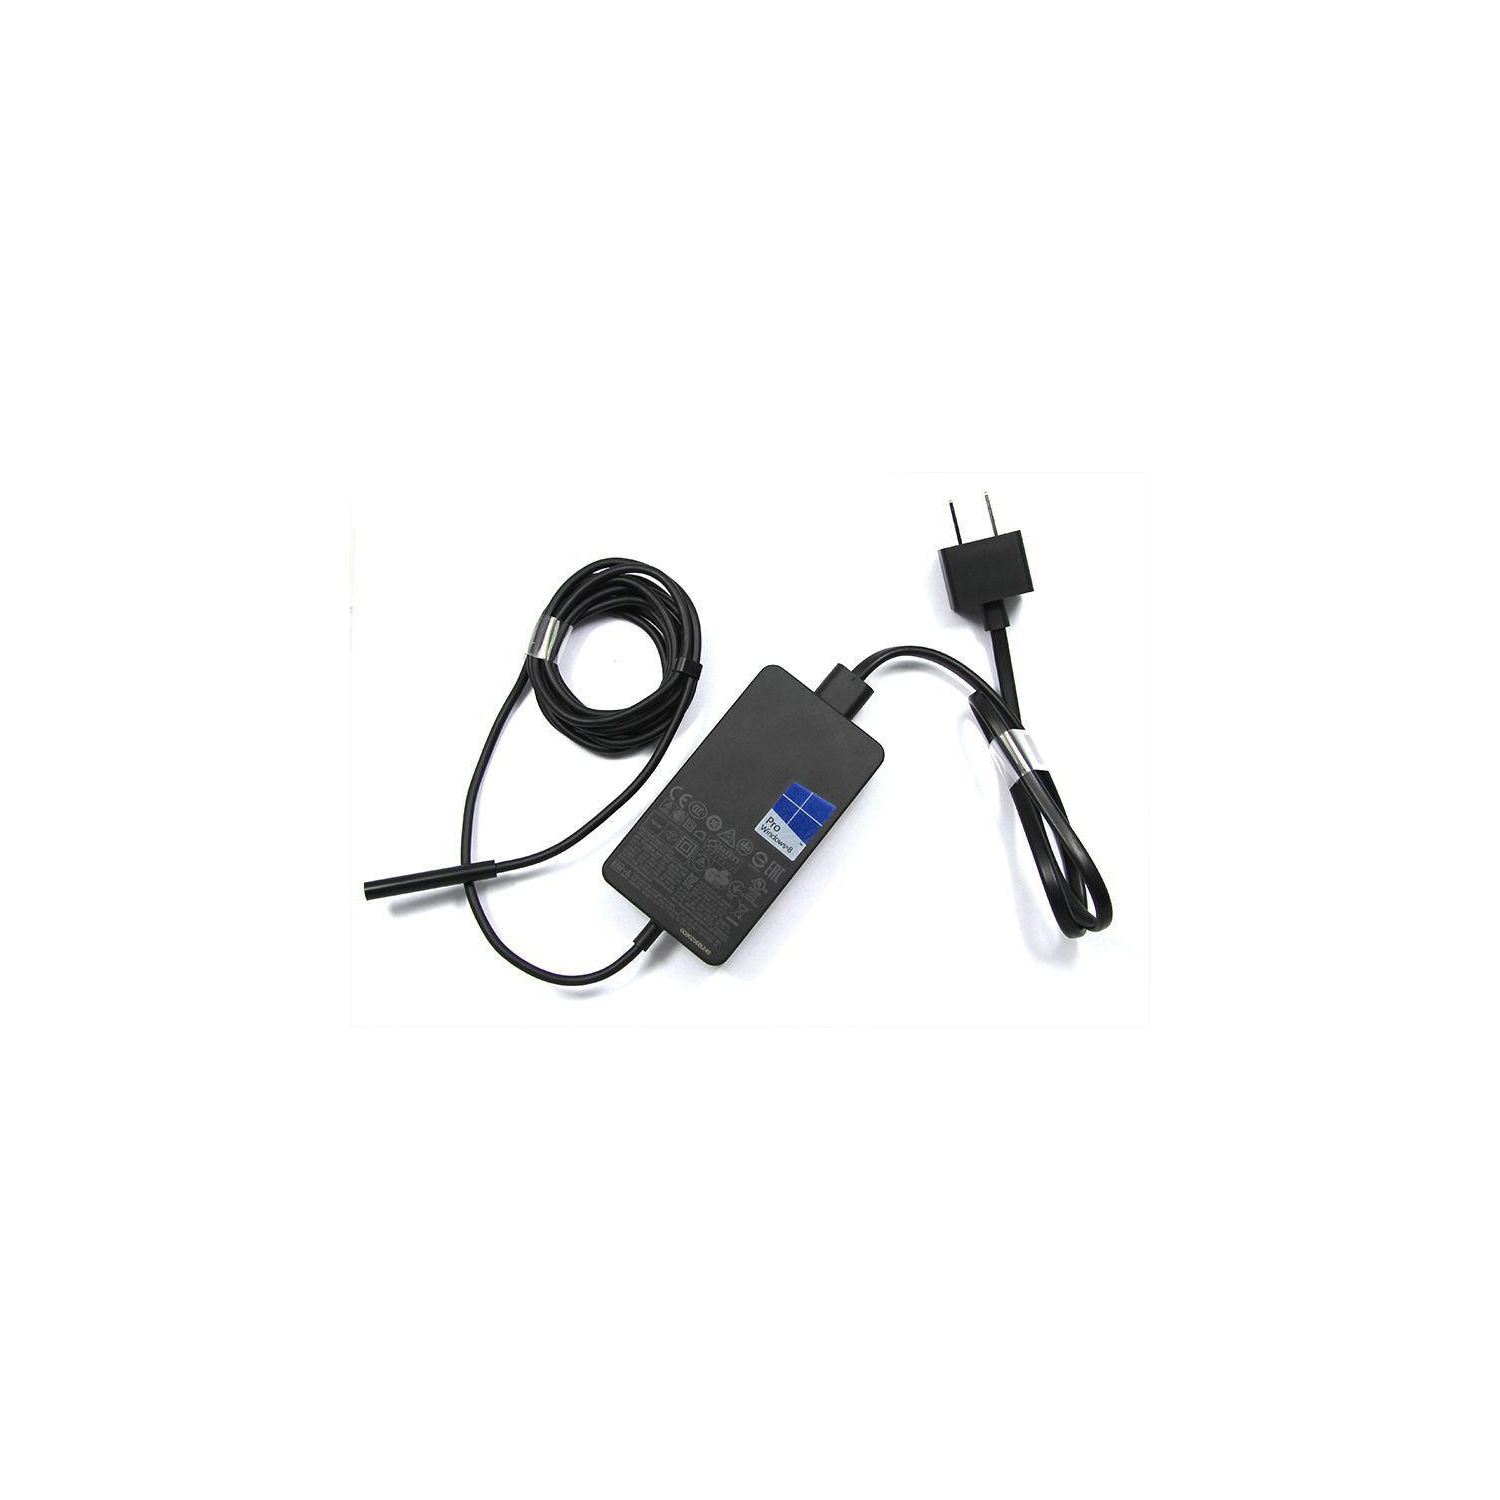 New Genuine Microsoft Surface Pro 3 1631 AC Power Adapter Charger 12V 2.58A 5V 1.0A